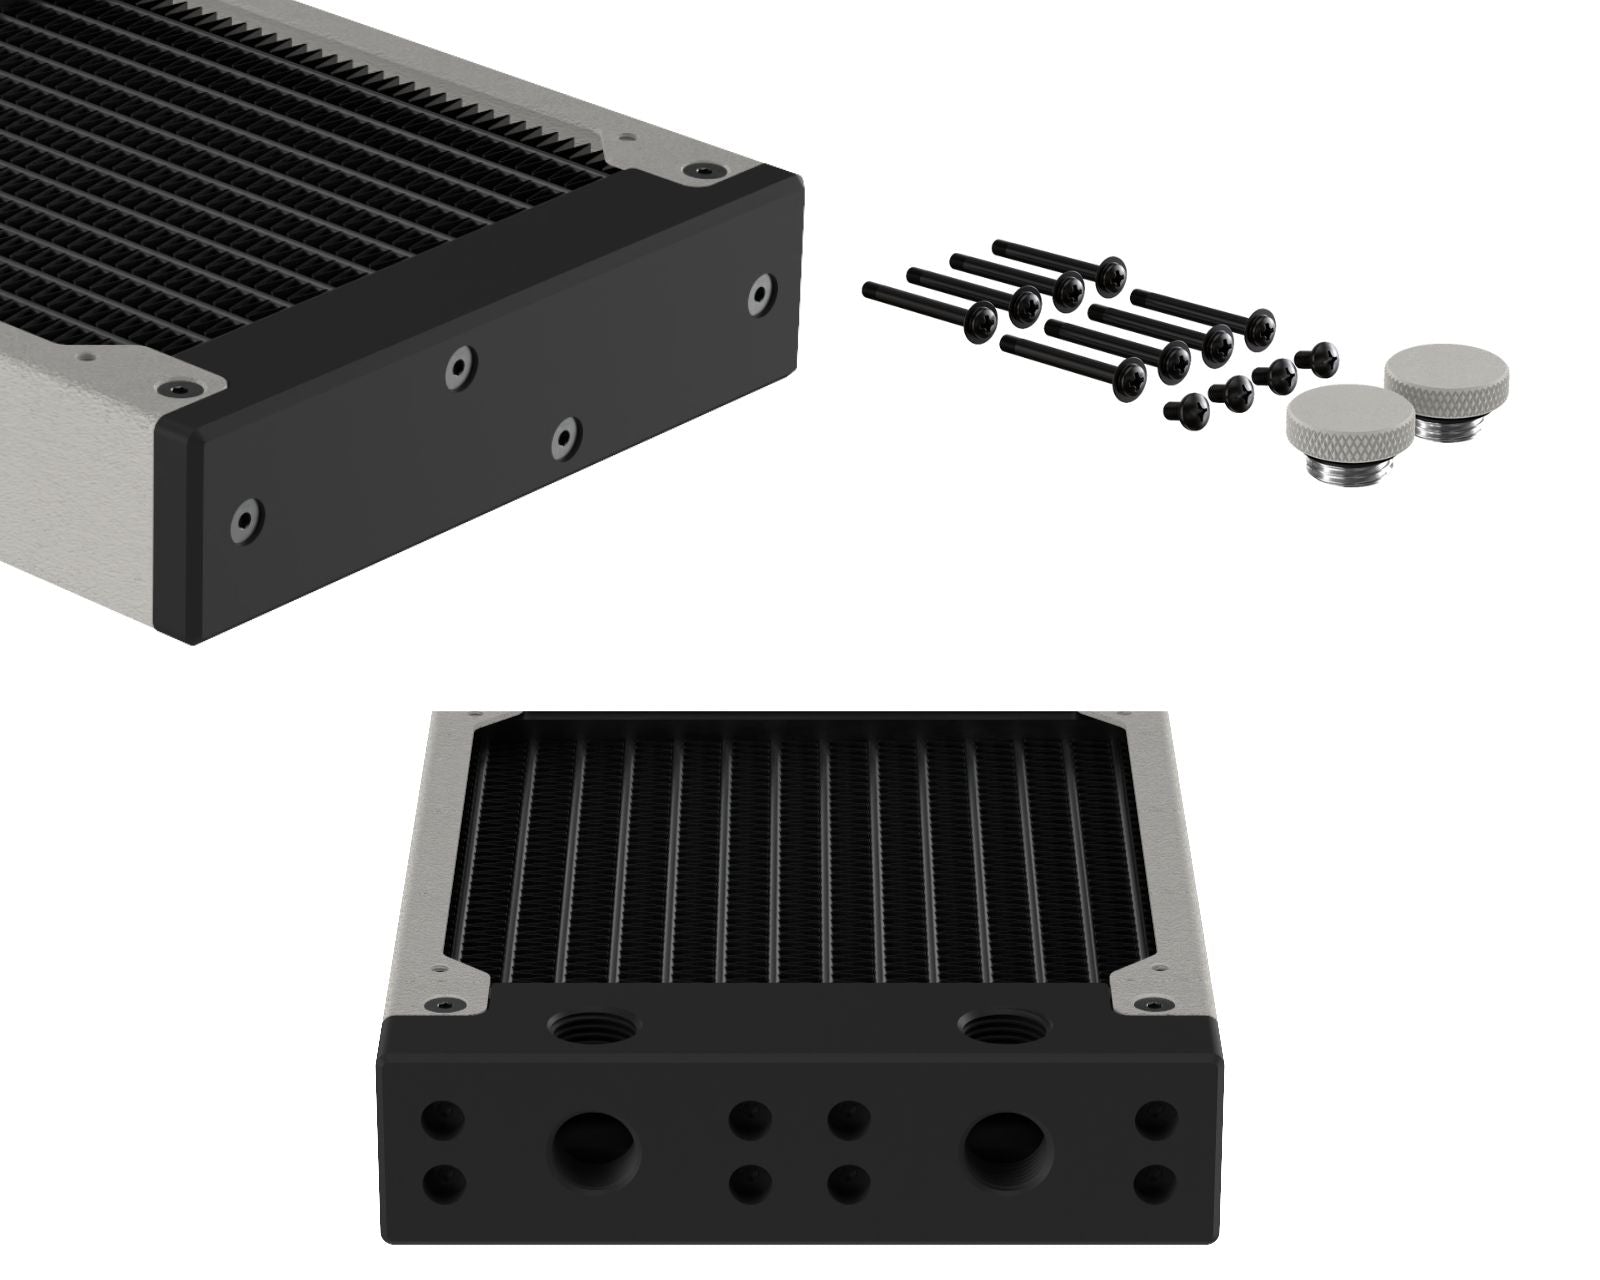 PrimoChill 240SL (30mm) EXIMO Modular Radiator, Black POM, 2x120mm, Dual Fan (R-SL-BK24) Available in 20+ Colors, Assembled in USA and Custom Watercooling Loop Ready - TX Matte Silver